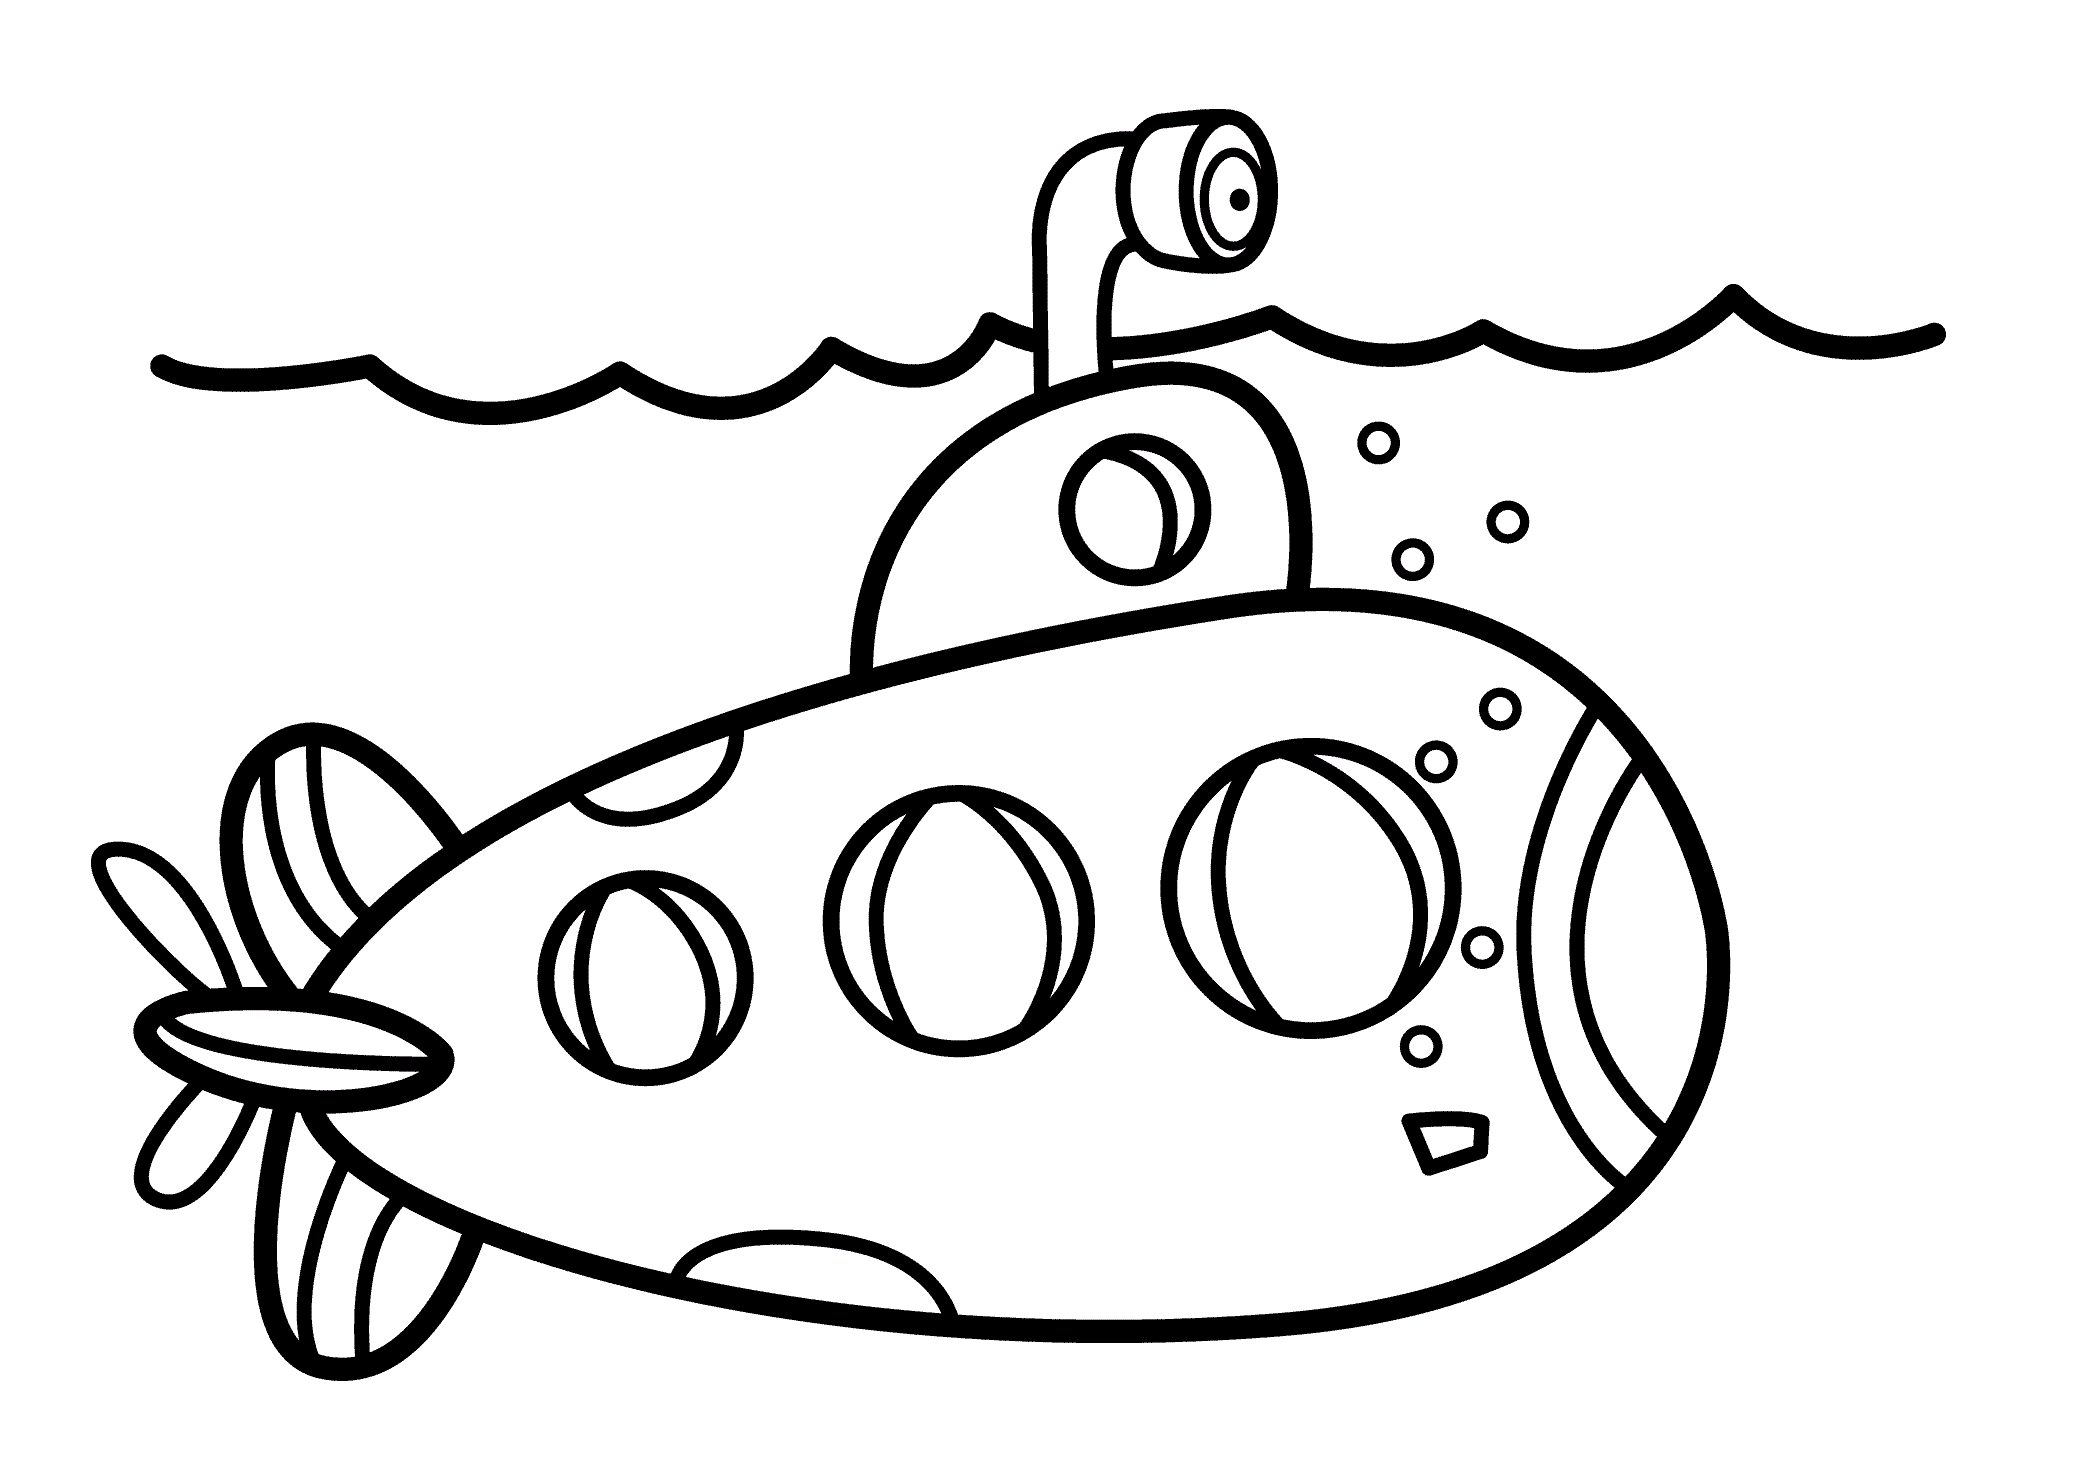 submarine coloring pages submarine coloring pages coloring pages to download and submarine coloring pages 